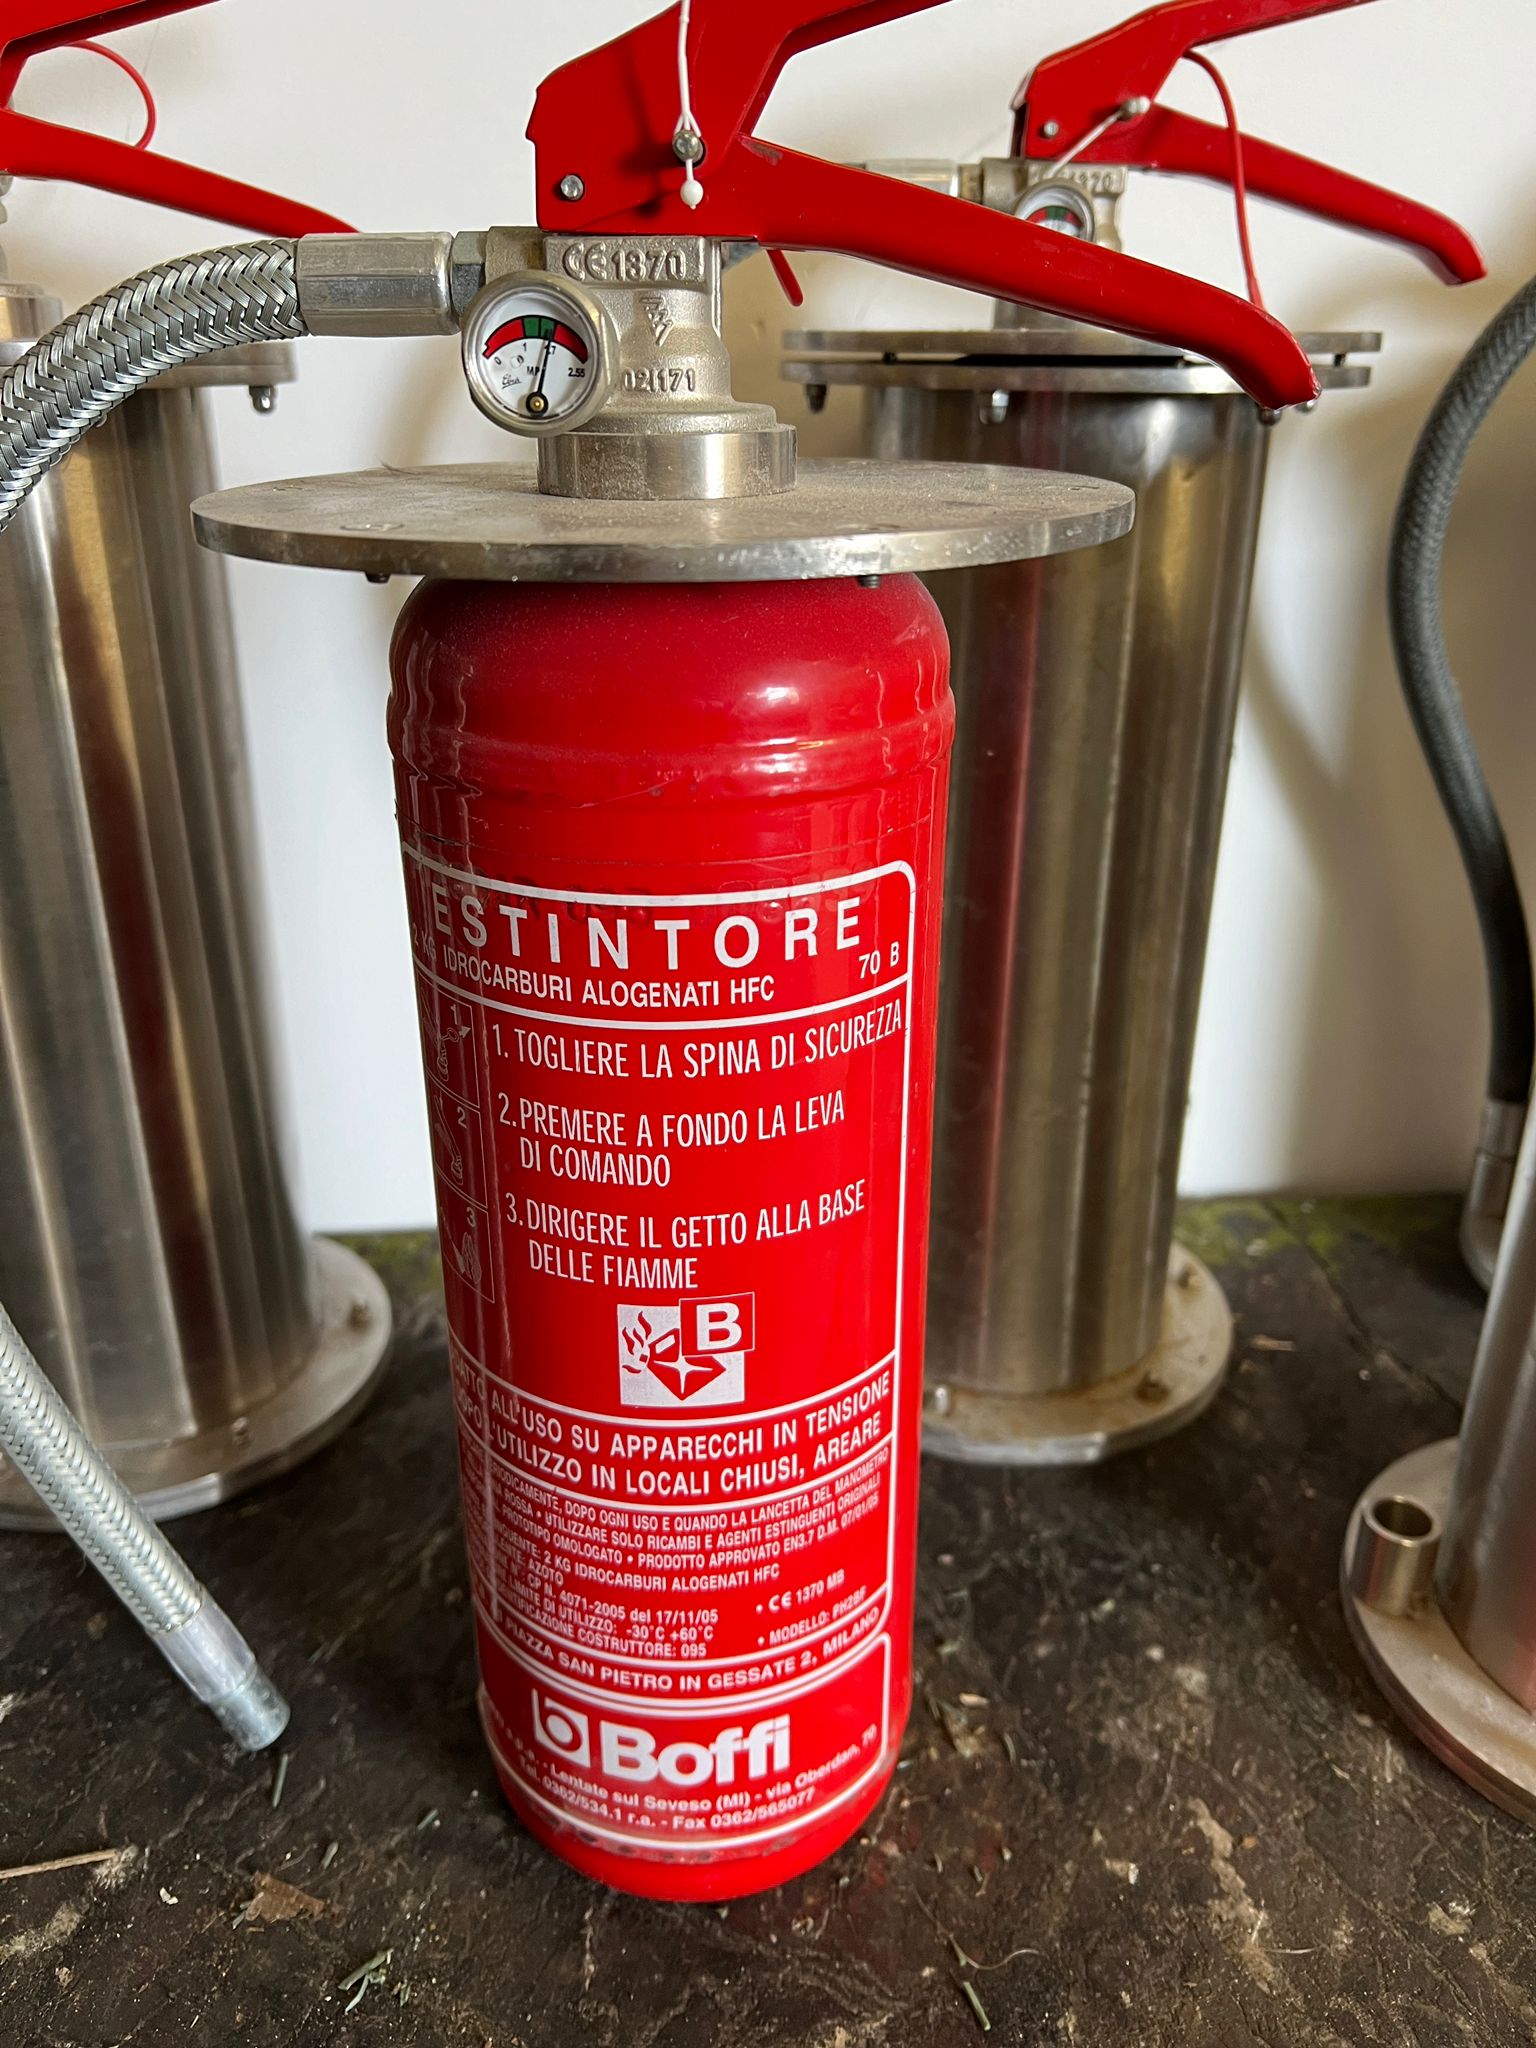 Six floor extinguishers in a stainless steel carcass by Boffi - Image 3 of 3